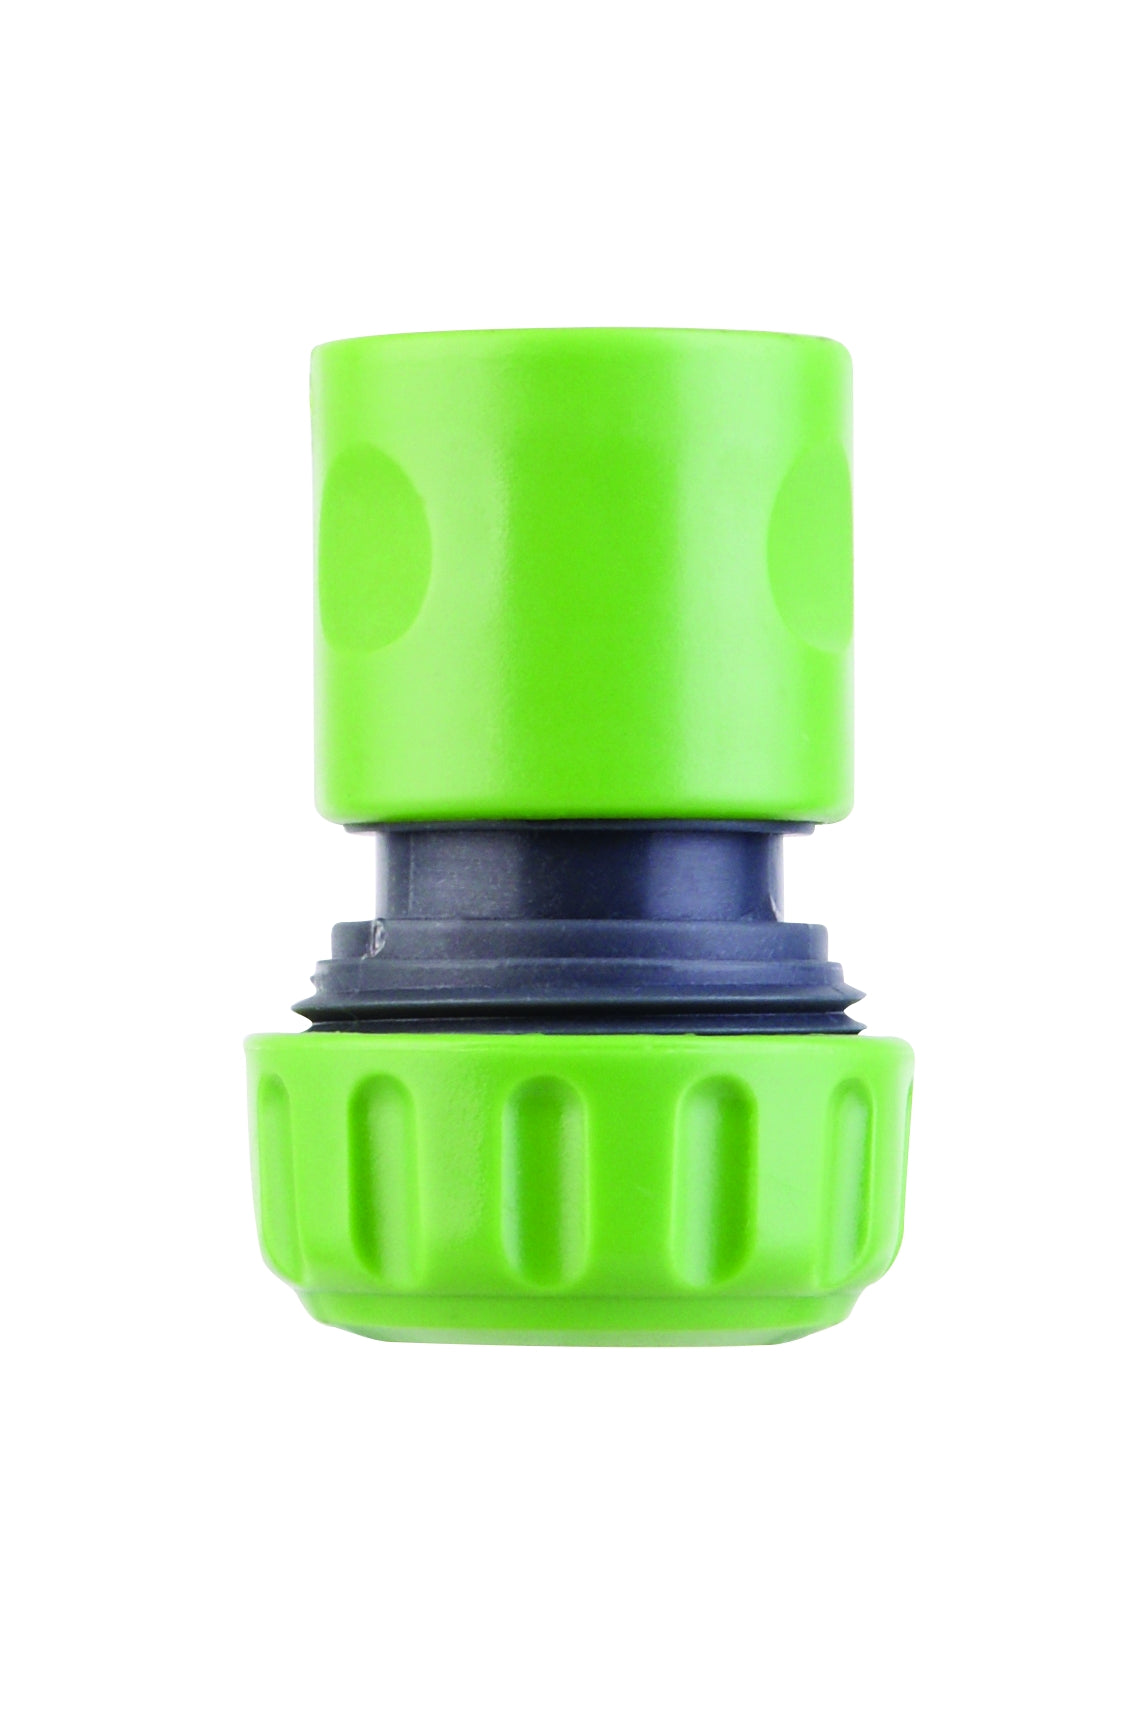 Hose Connector 3/4 Inch